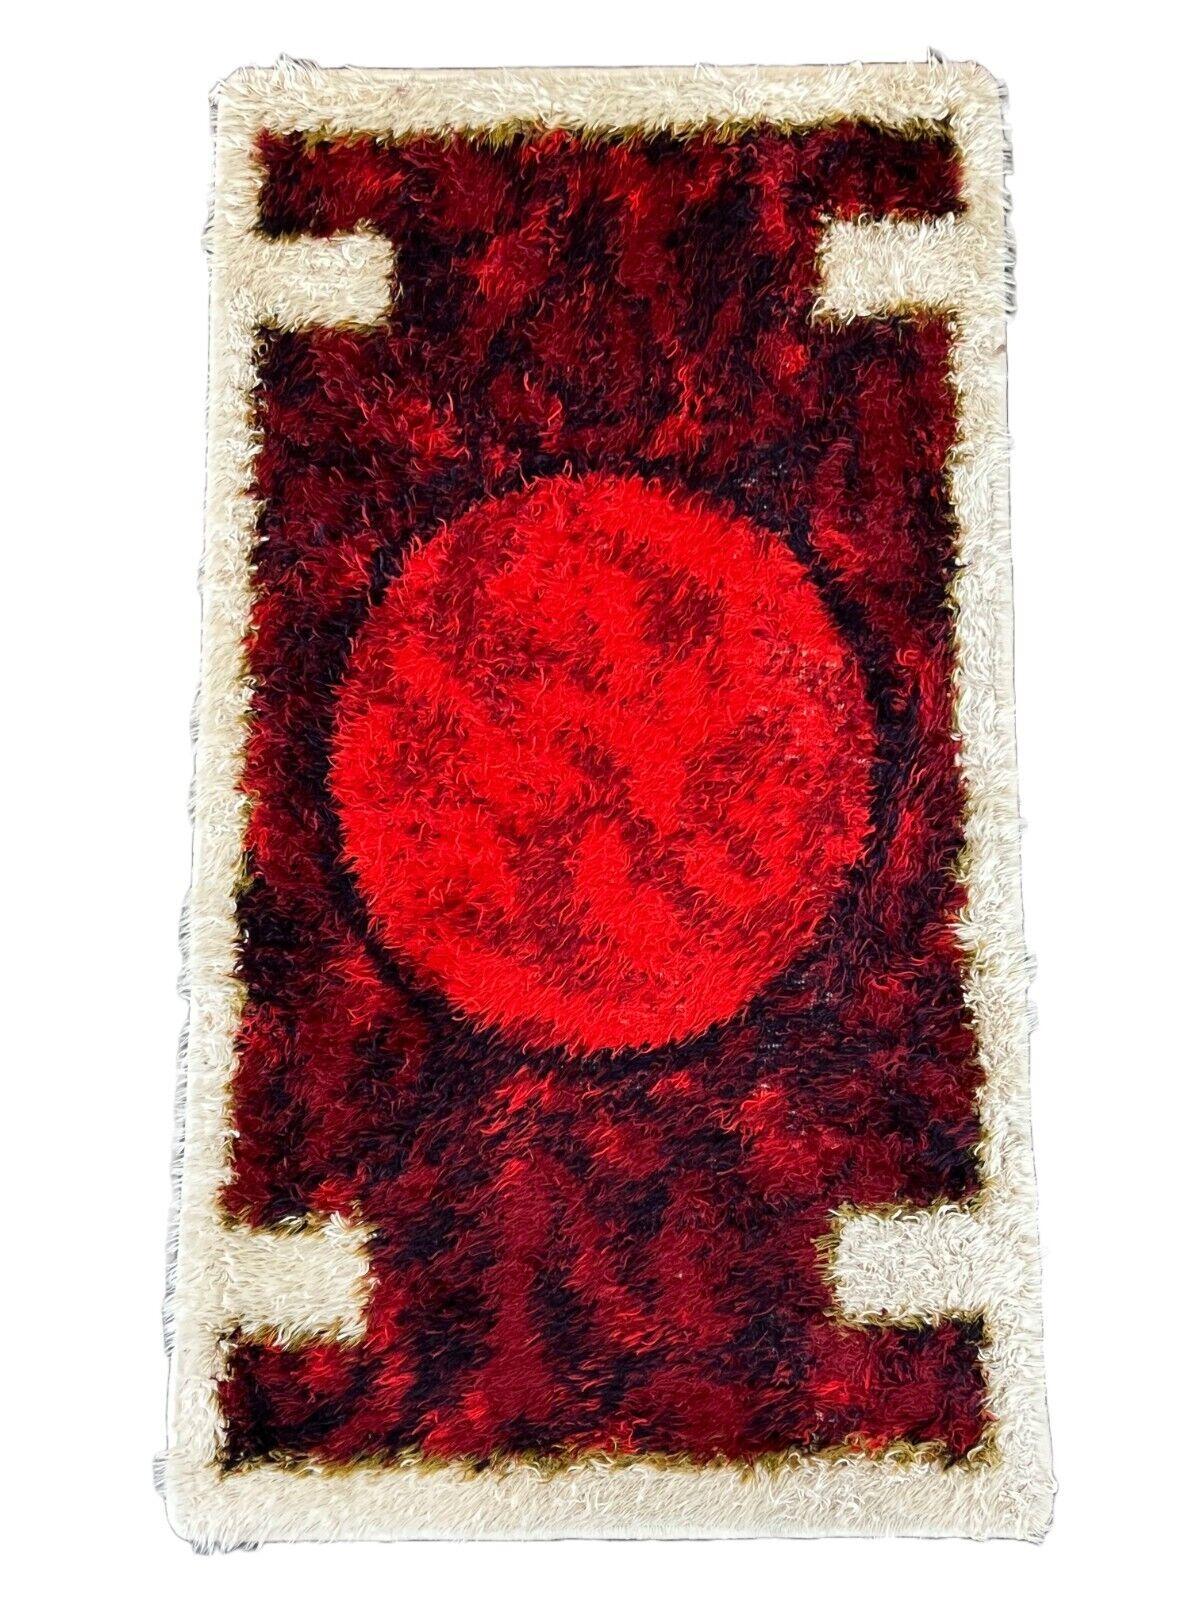 60s 70s runner rug Carpet Rug Space Age by Hojer Eksport Denmark Design

Object: Carpet

Manufacturer:

Condition: Good - vintage

Age: around 1960-1970

Dimensions:

Width = 139cm
Height = 77cm

Other notes:

The pictures serve as